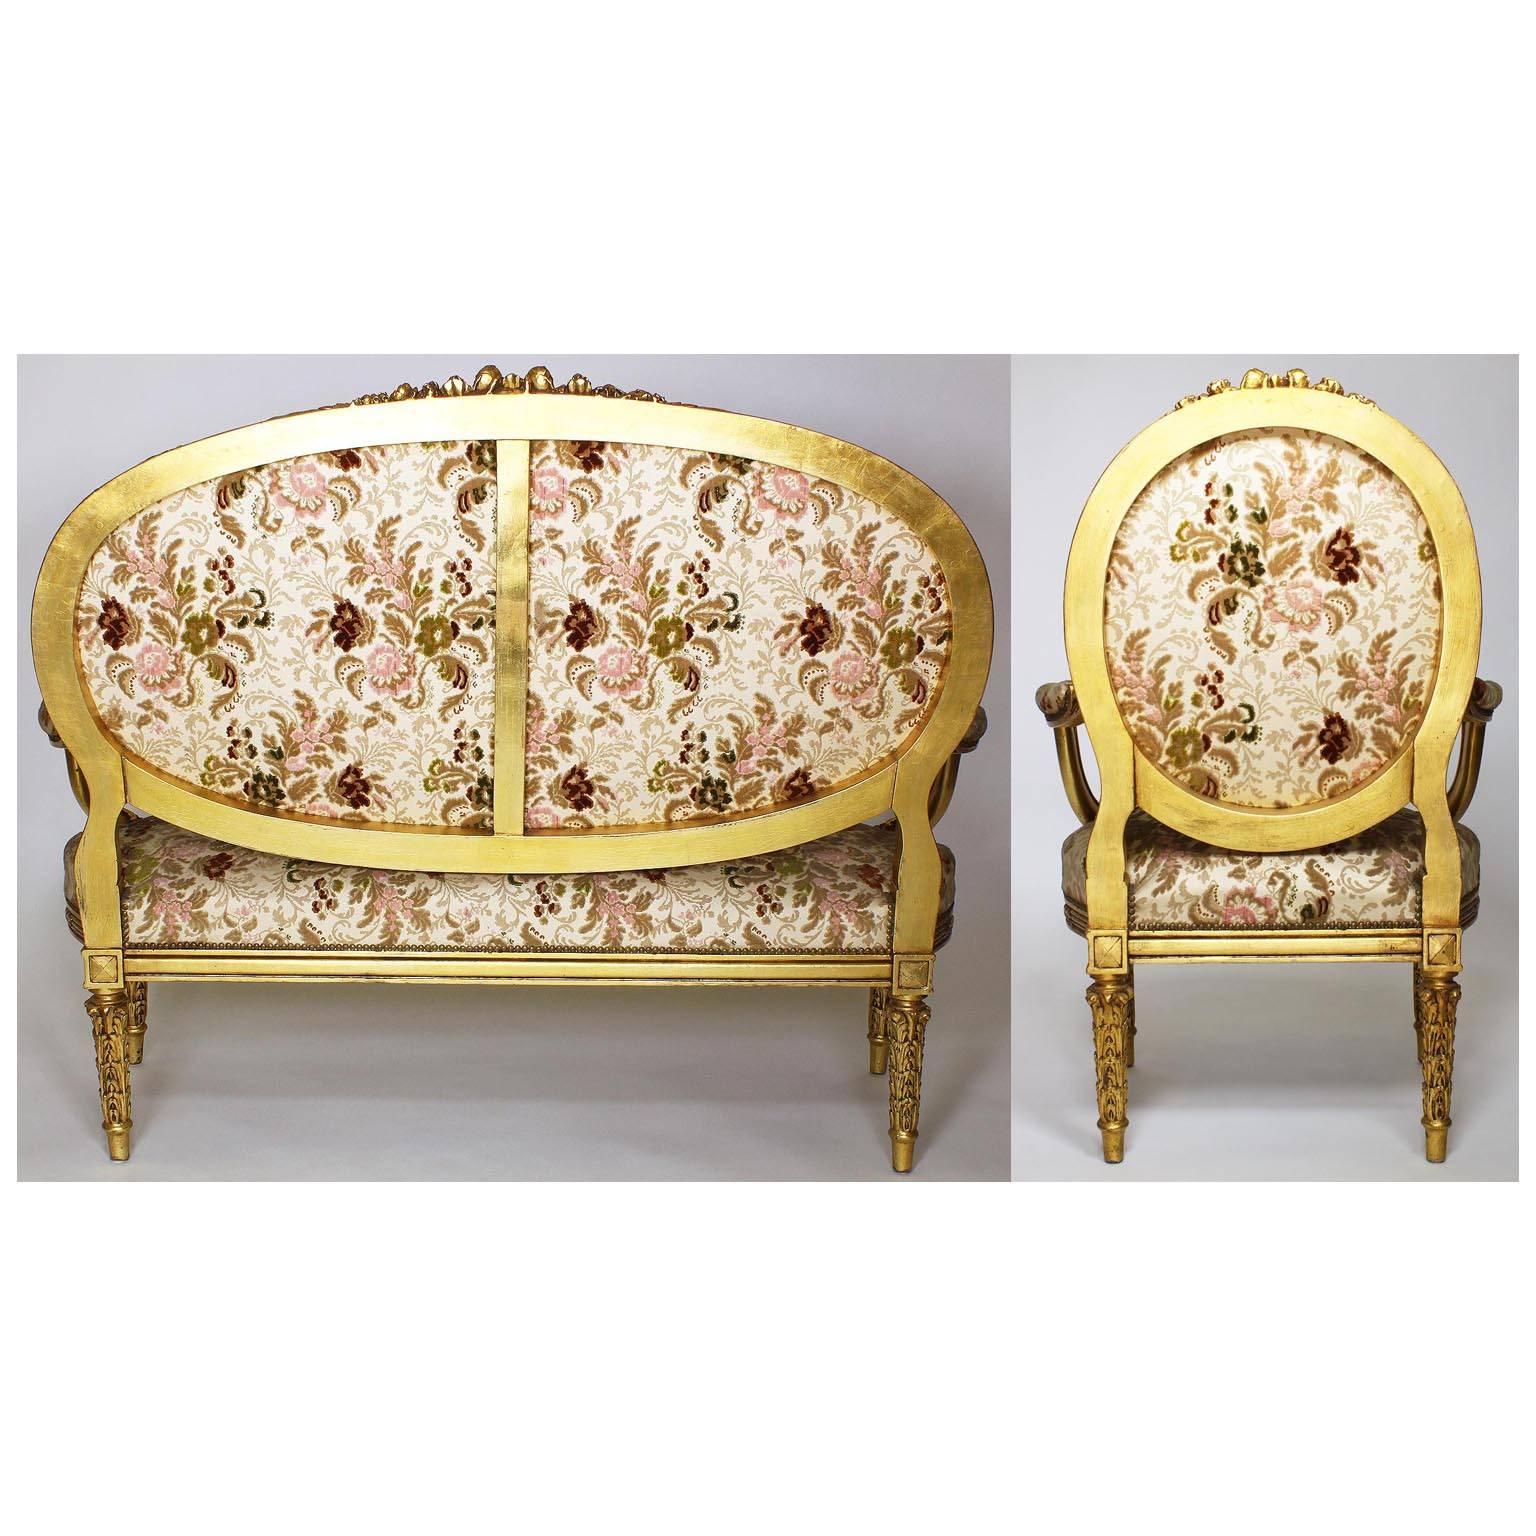 French 19th-20th Century Louis XV Style Giltwood Carved Five-Piece Salon Suite For Sale 1